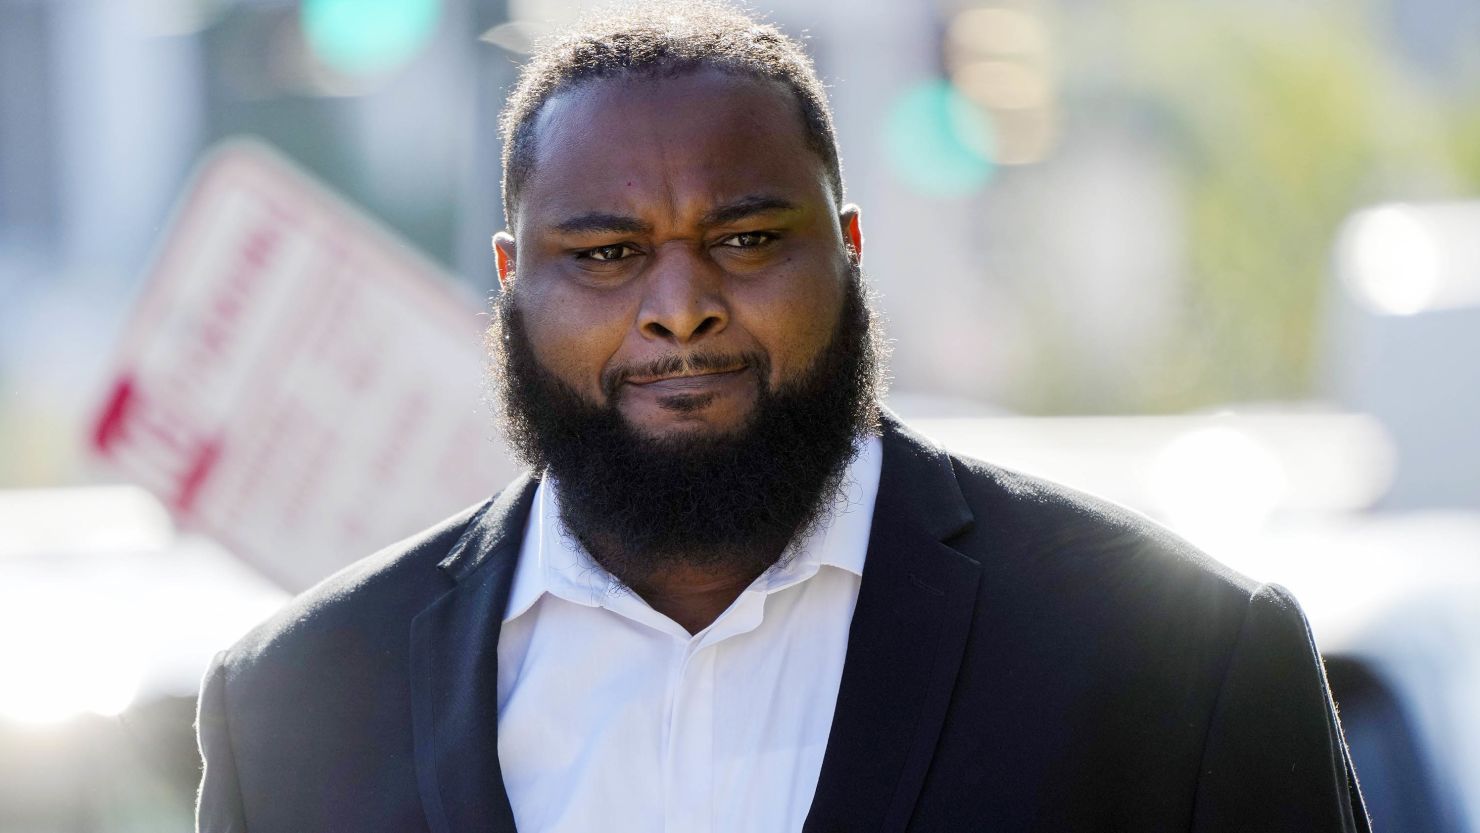 Will Smith shooting: Cardell Hayes, man who shot and killed the NFL star in 2016, is convicted of manslaughter in retrial | CNN